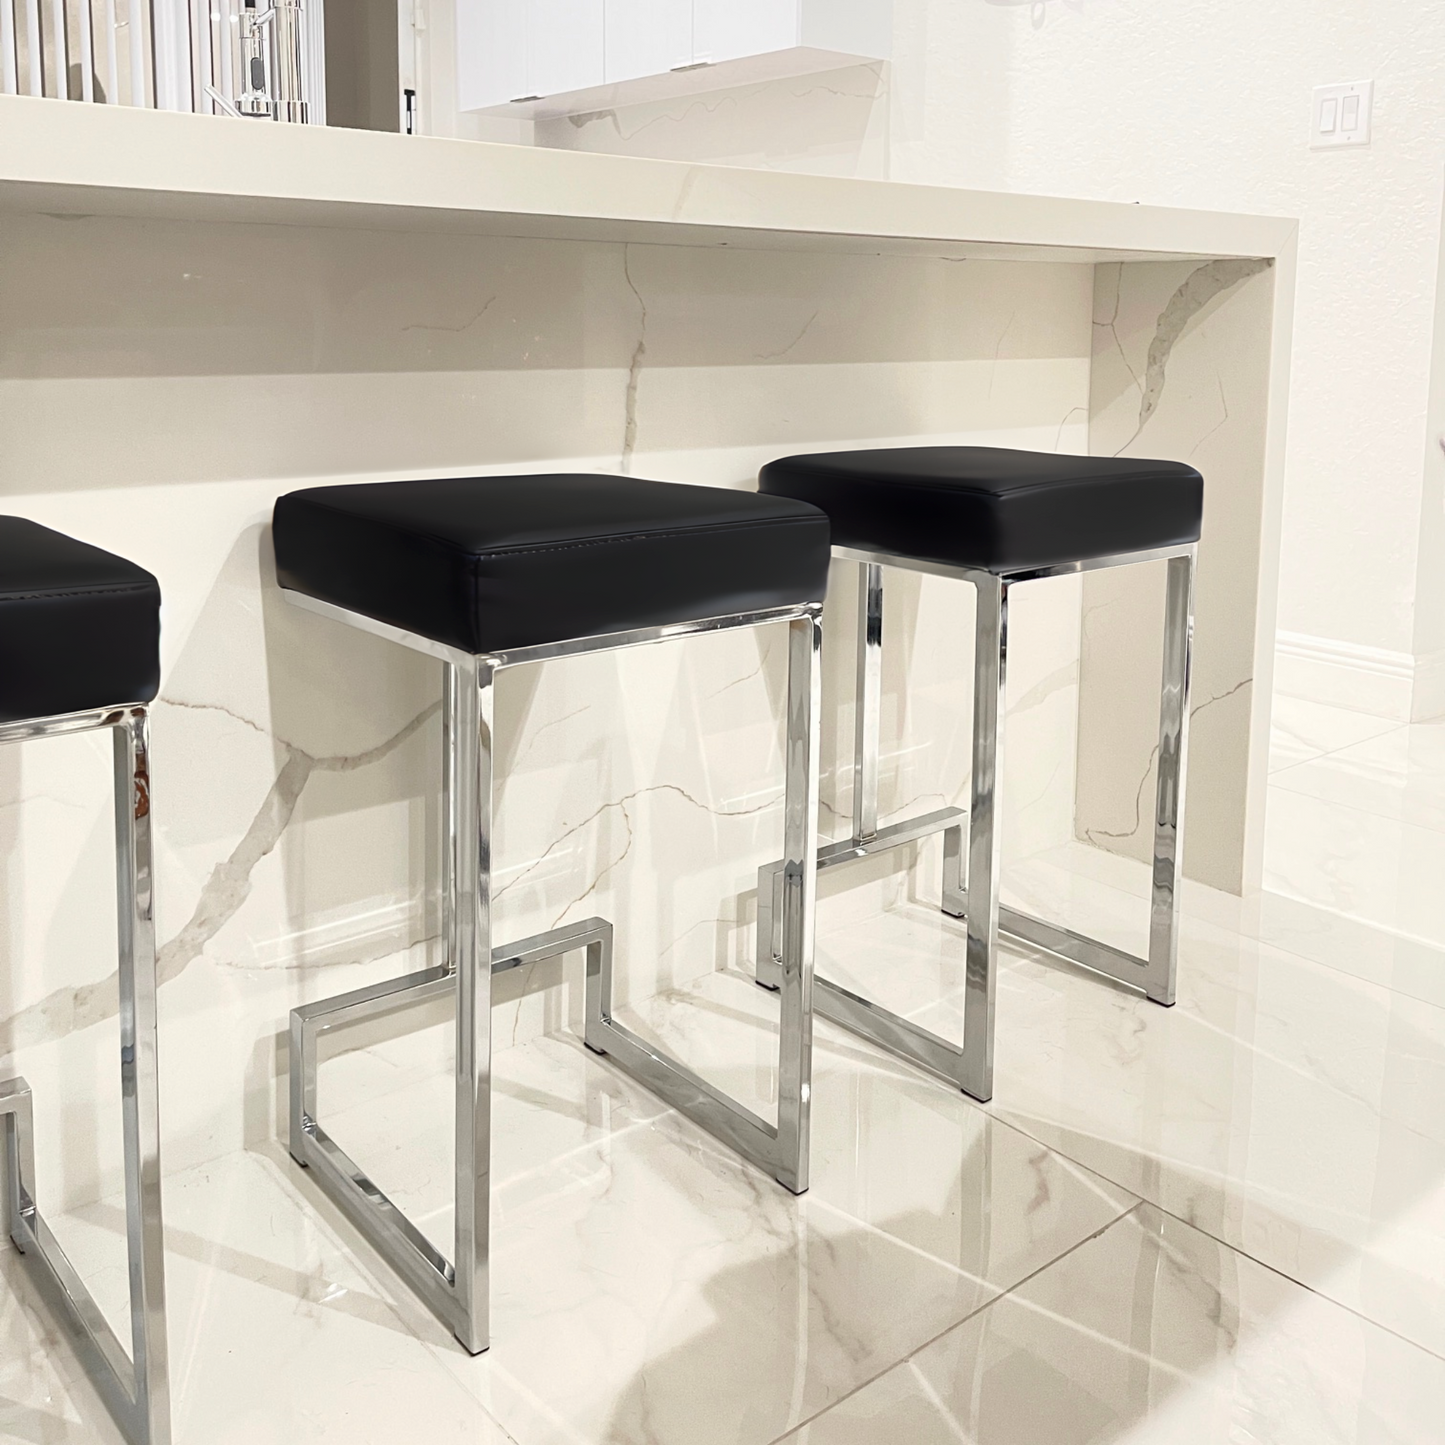 GERVASE Square Counter Height Stool Black and Chrome